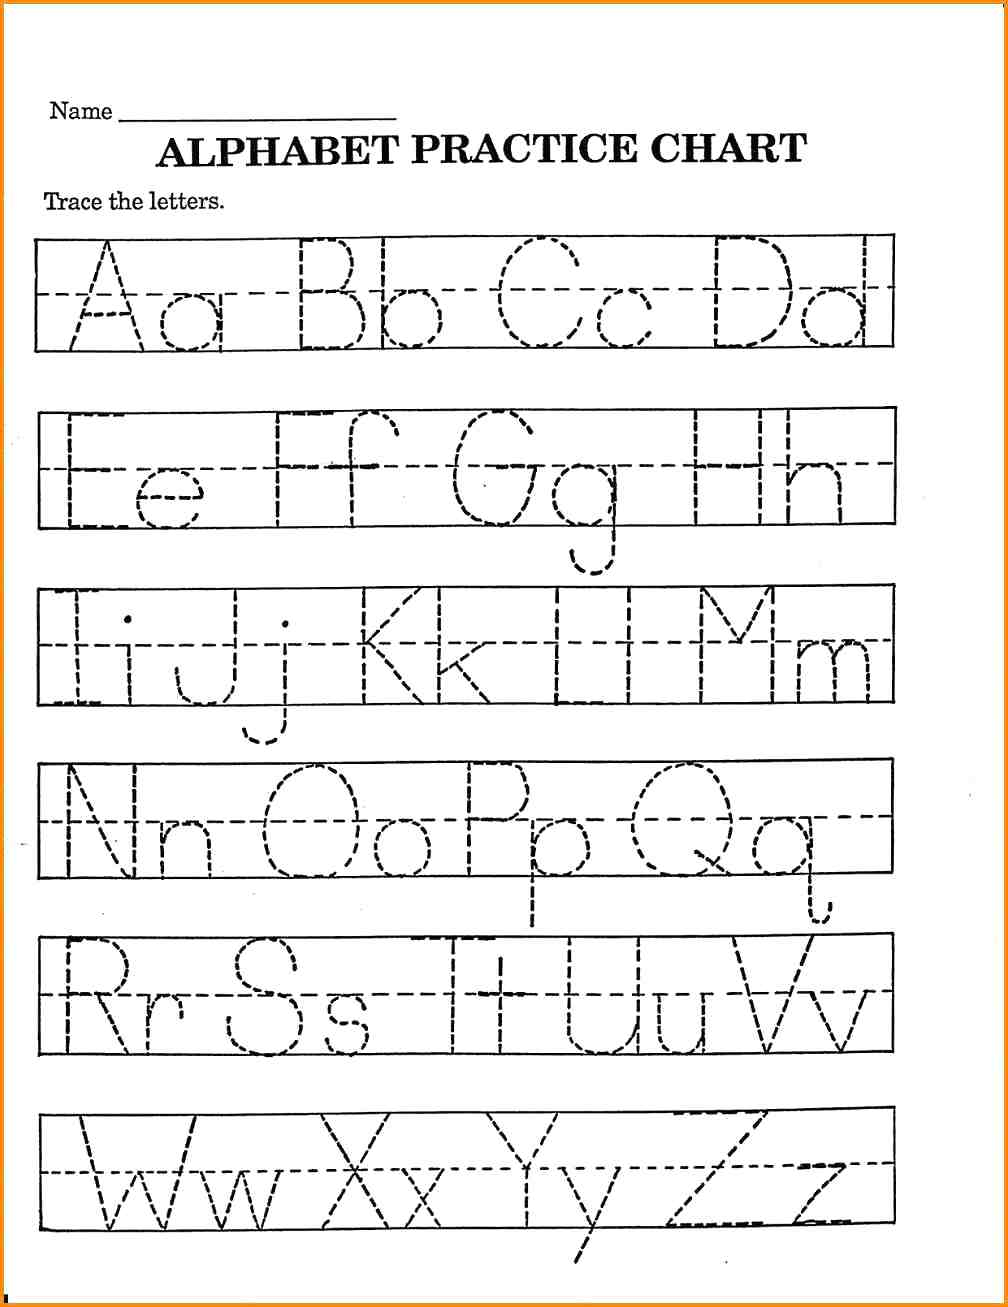 Phenomenal Abcd Writing Practice Picture Ideas – Fundacion intended for Alphabet Worksheets Pdf